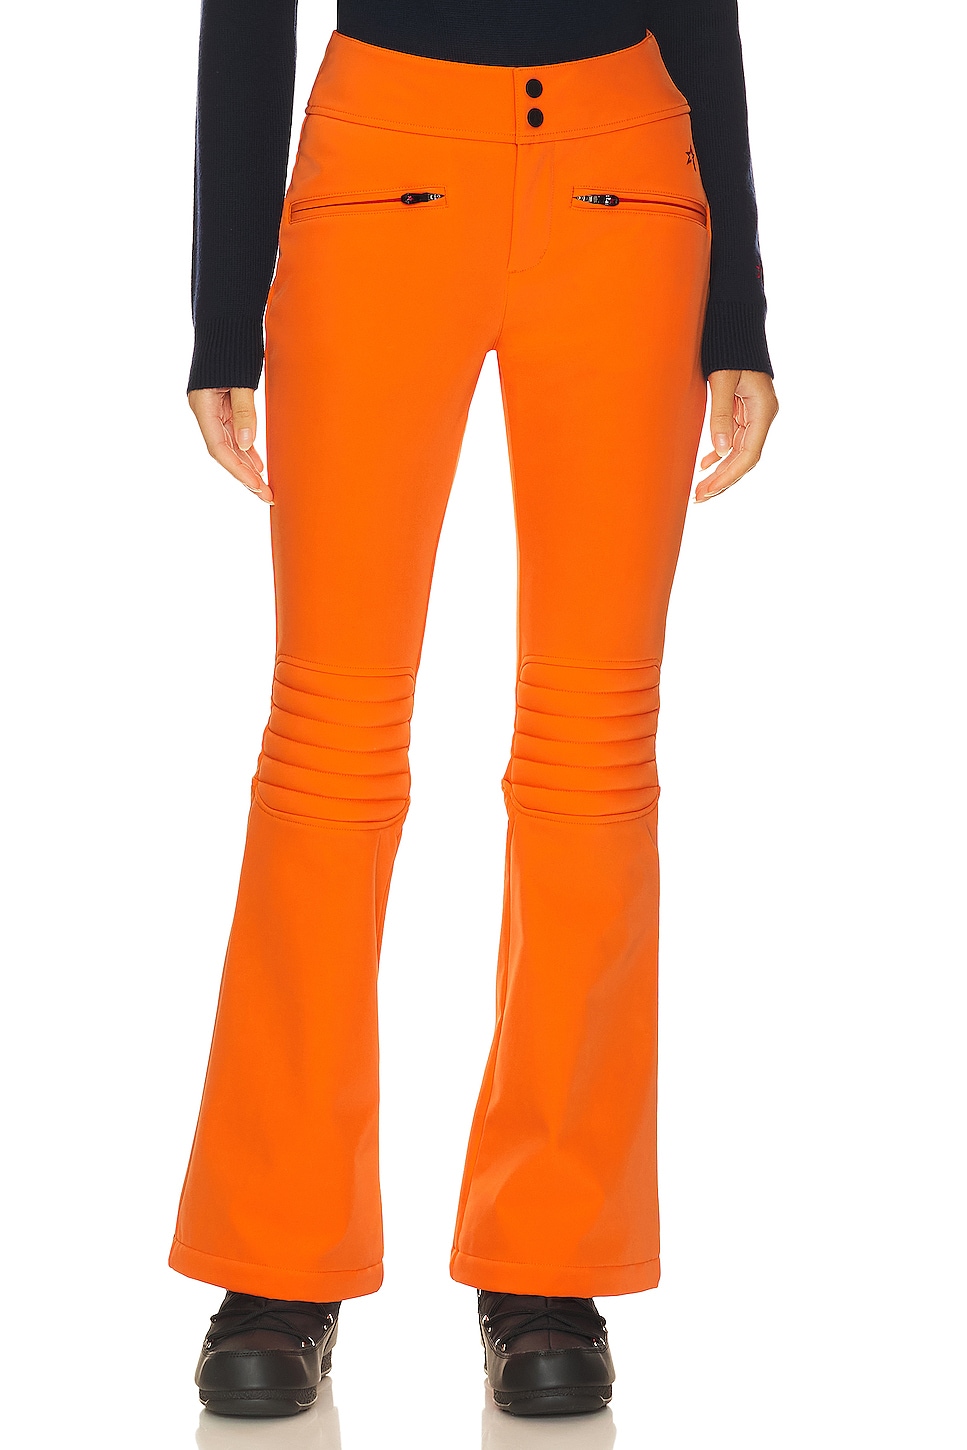 Buy Perfect Moment Aurora High Waist Flare Pant online